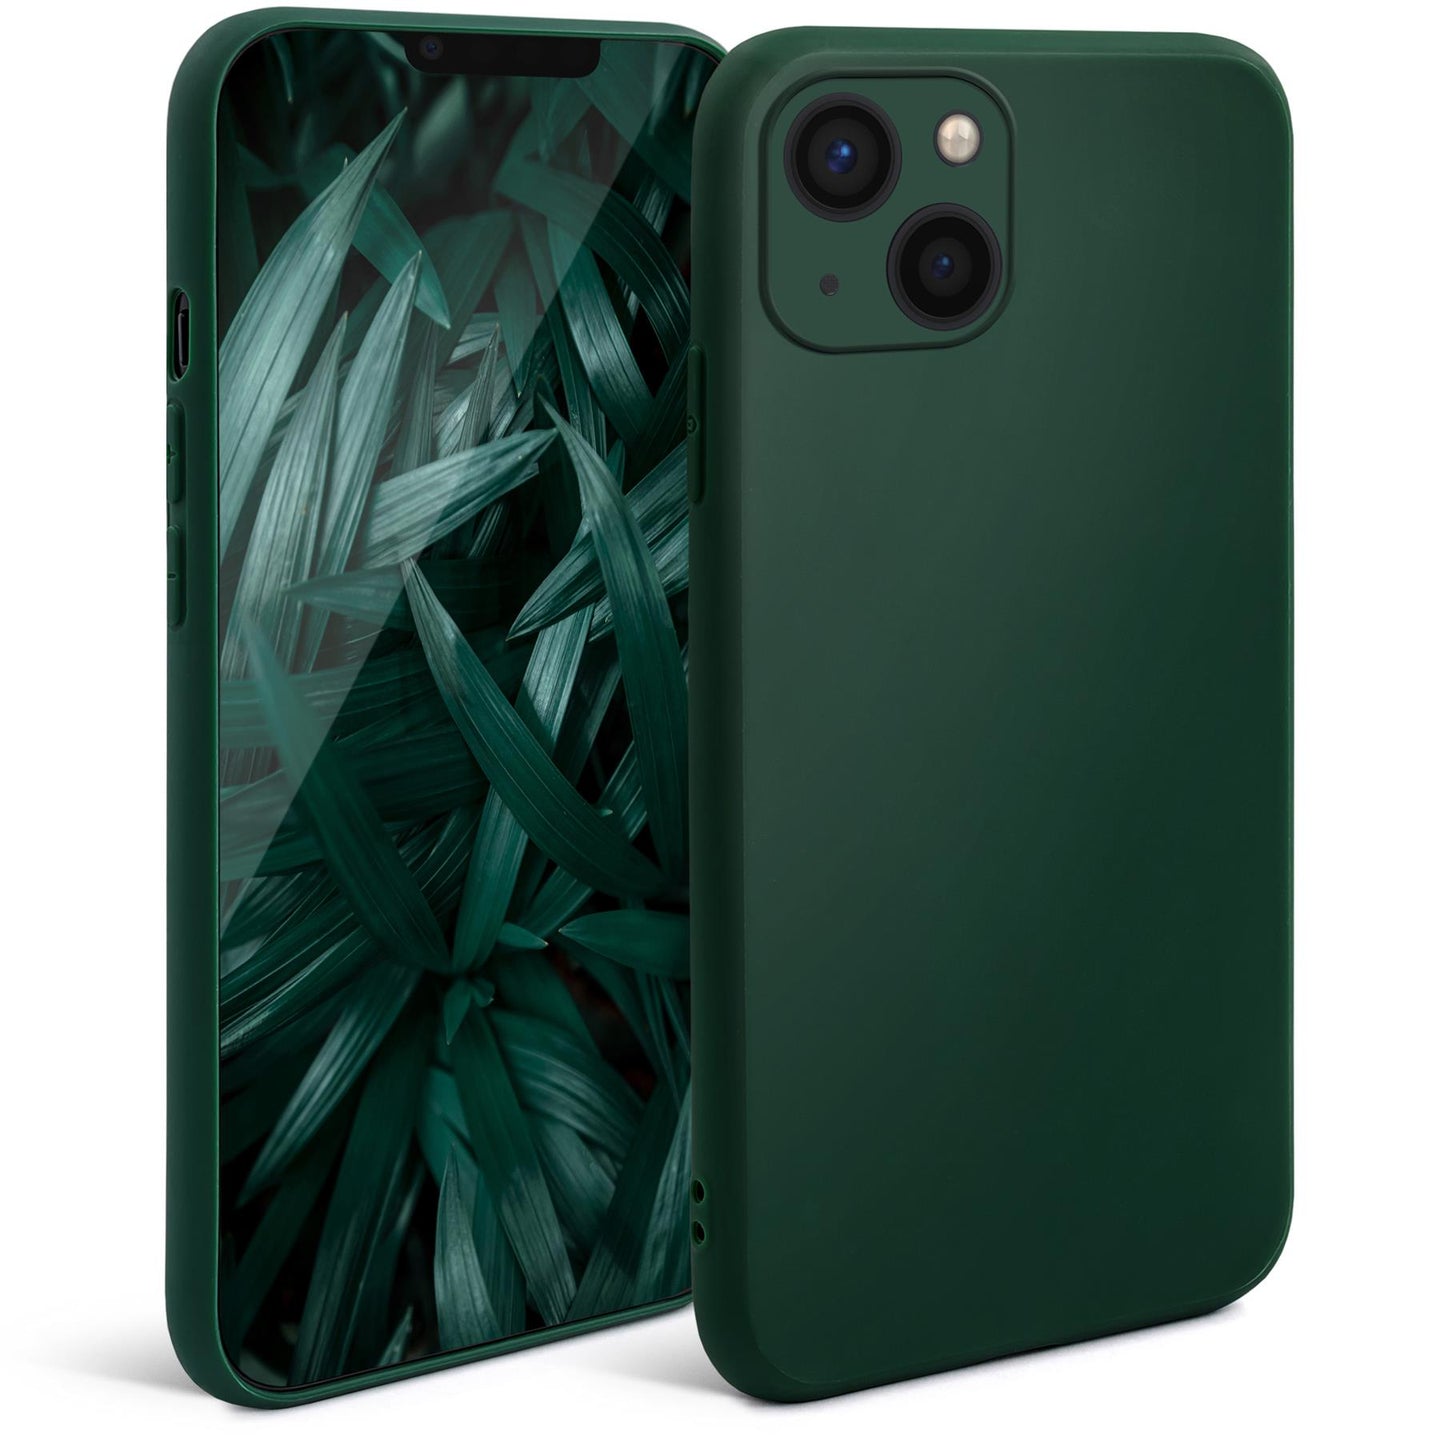 Moozy Minimalist Series Silicone Case for iPhone 13 Mini, Midnight Green - Matte Finish Lightweight Mobile Phone Case Slim Soft Protective